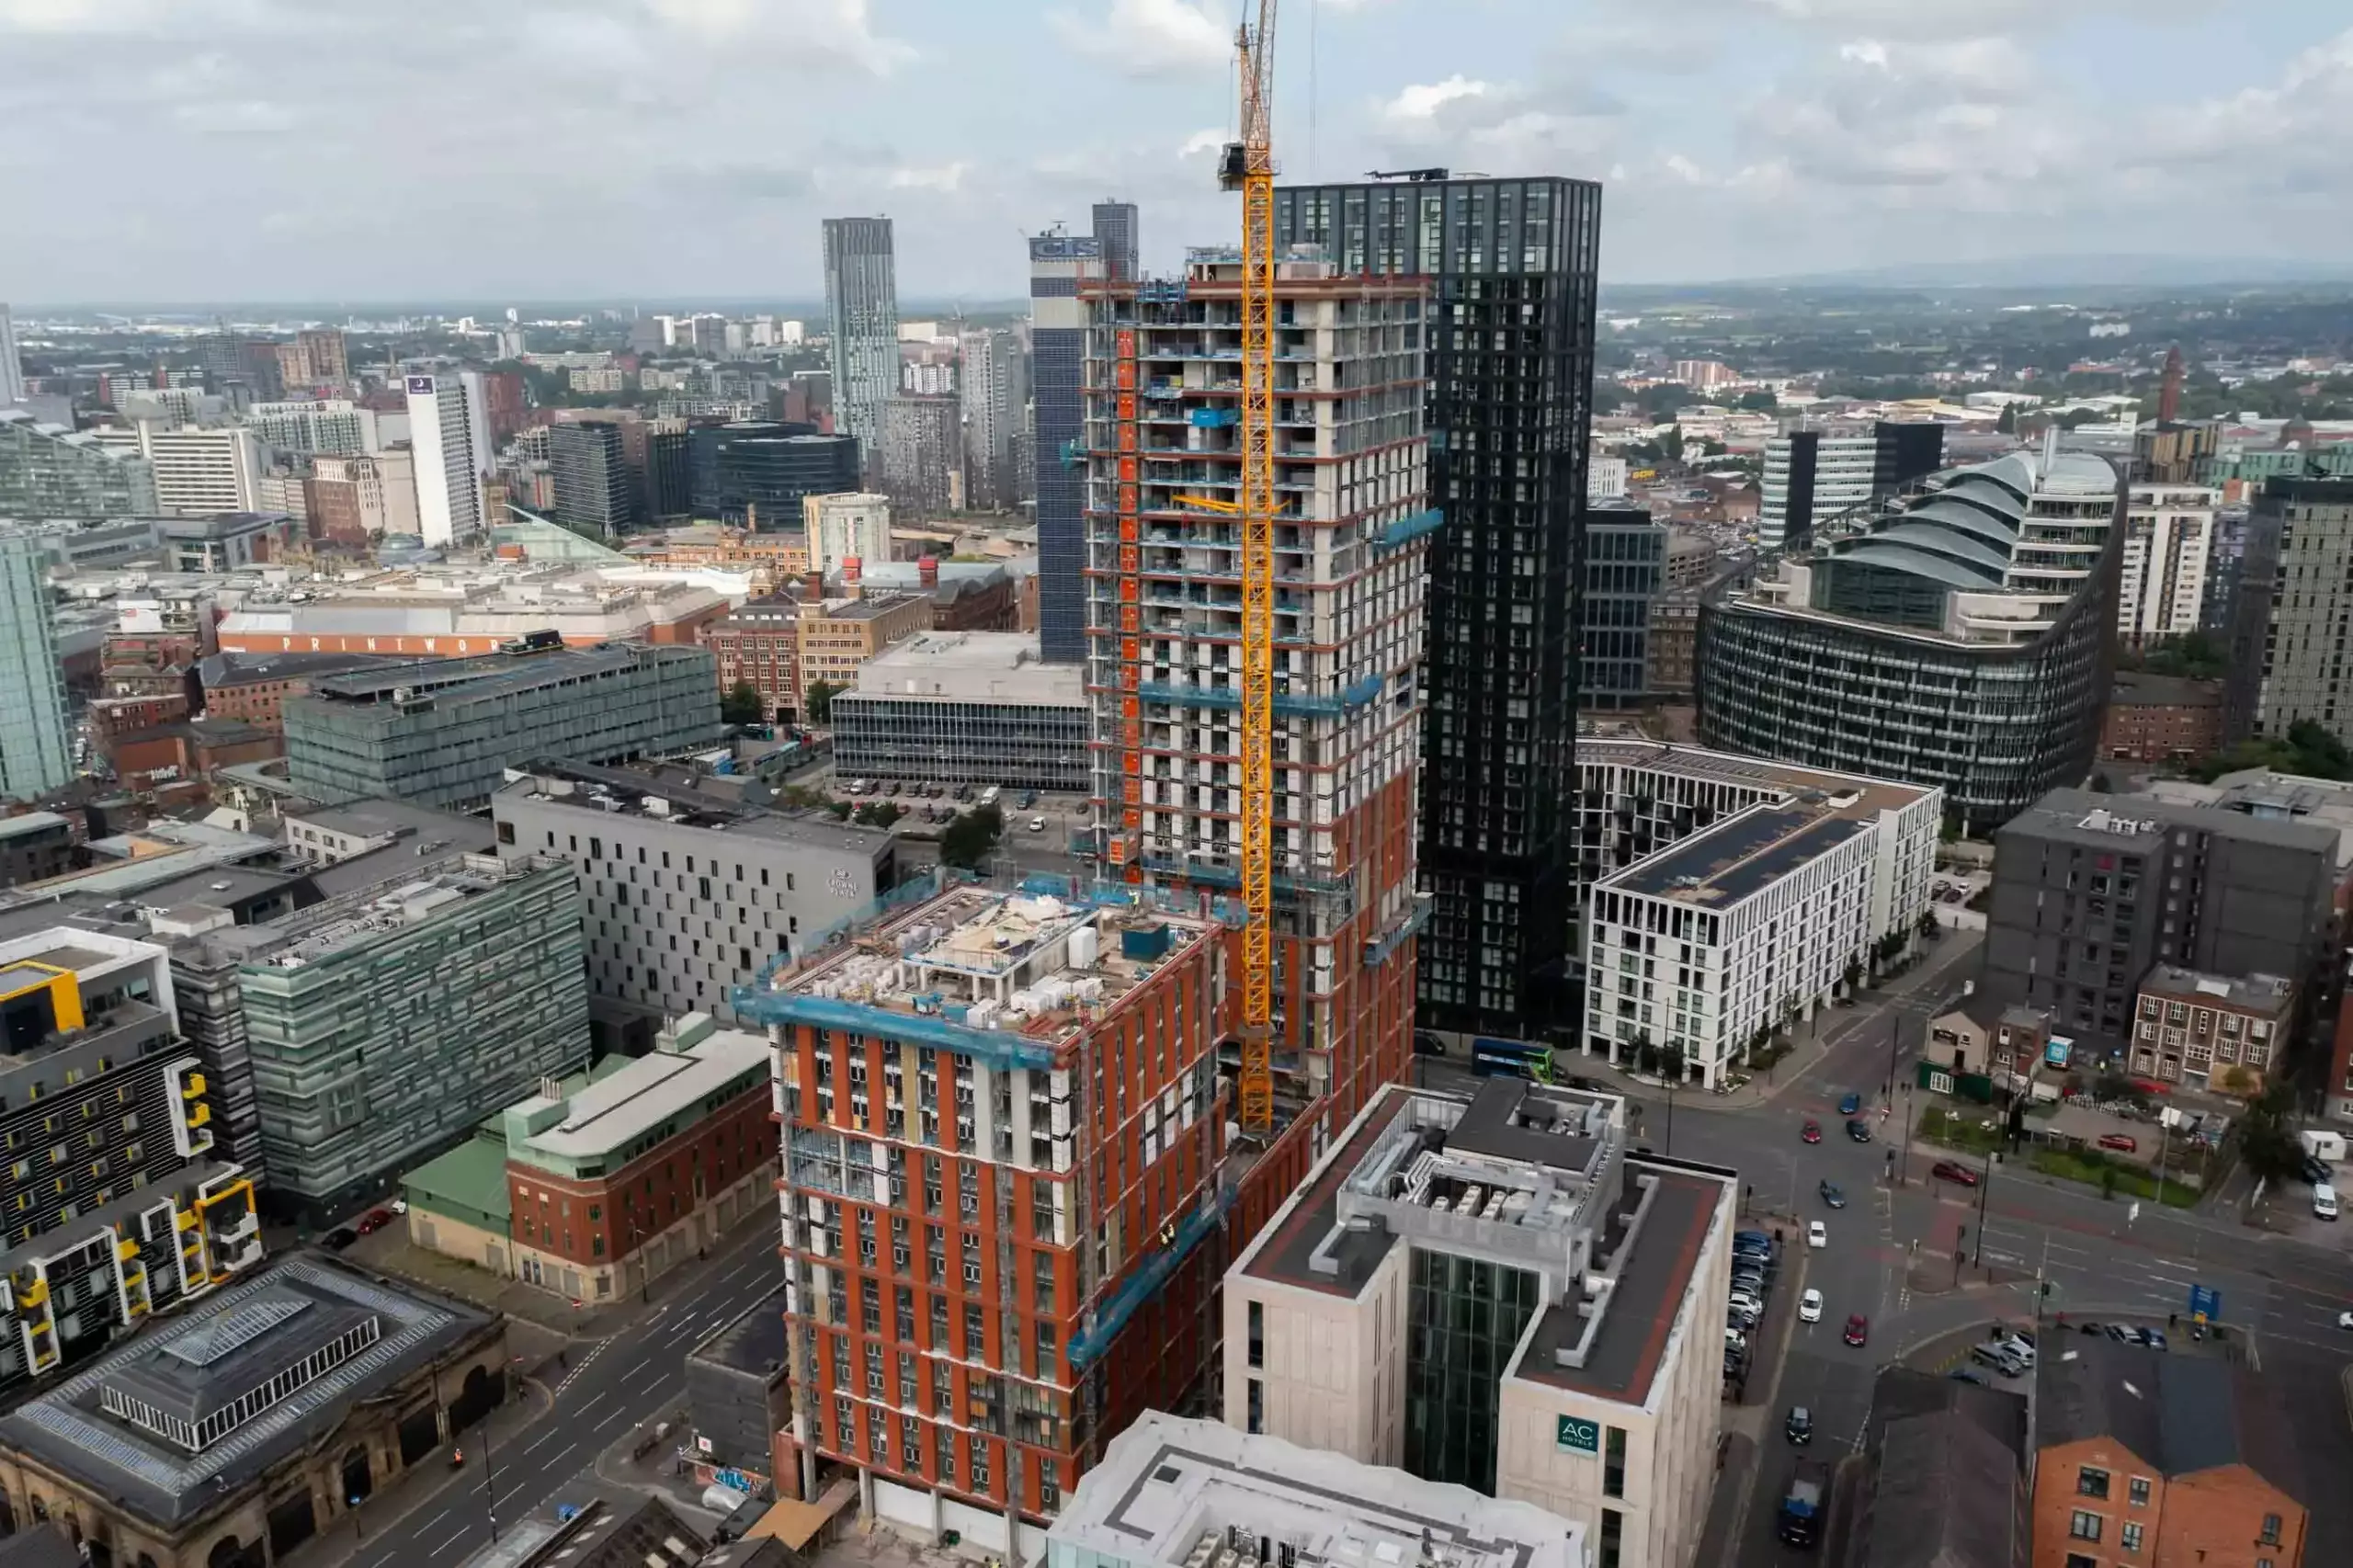 Aerial filming of tall tower block construction project in Manchester